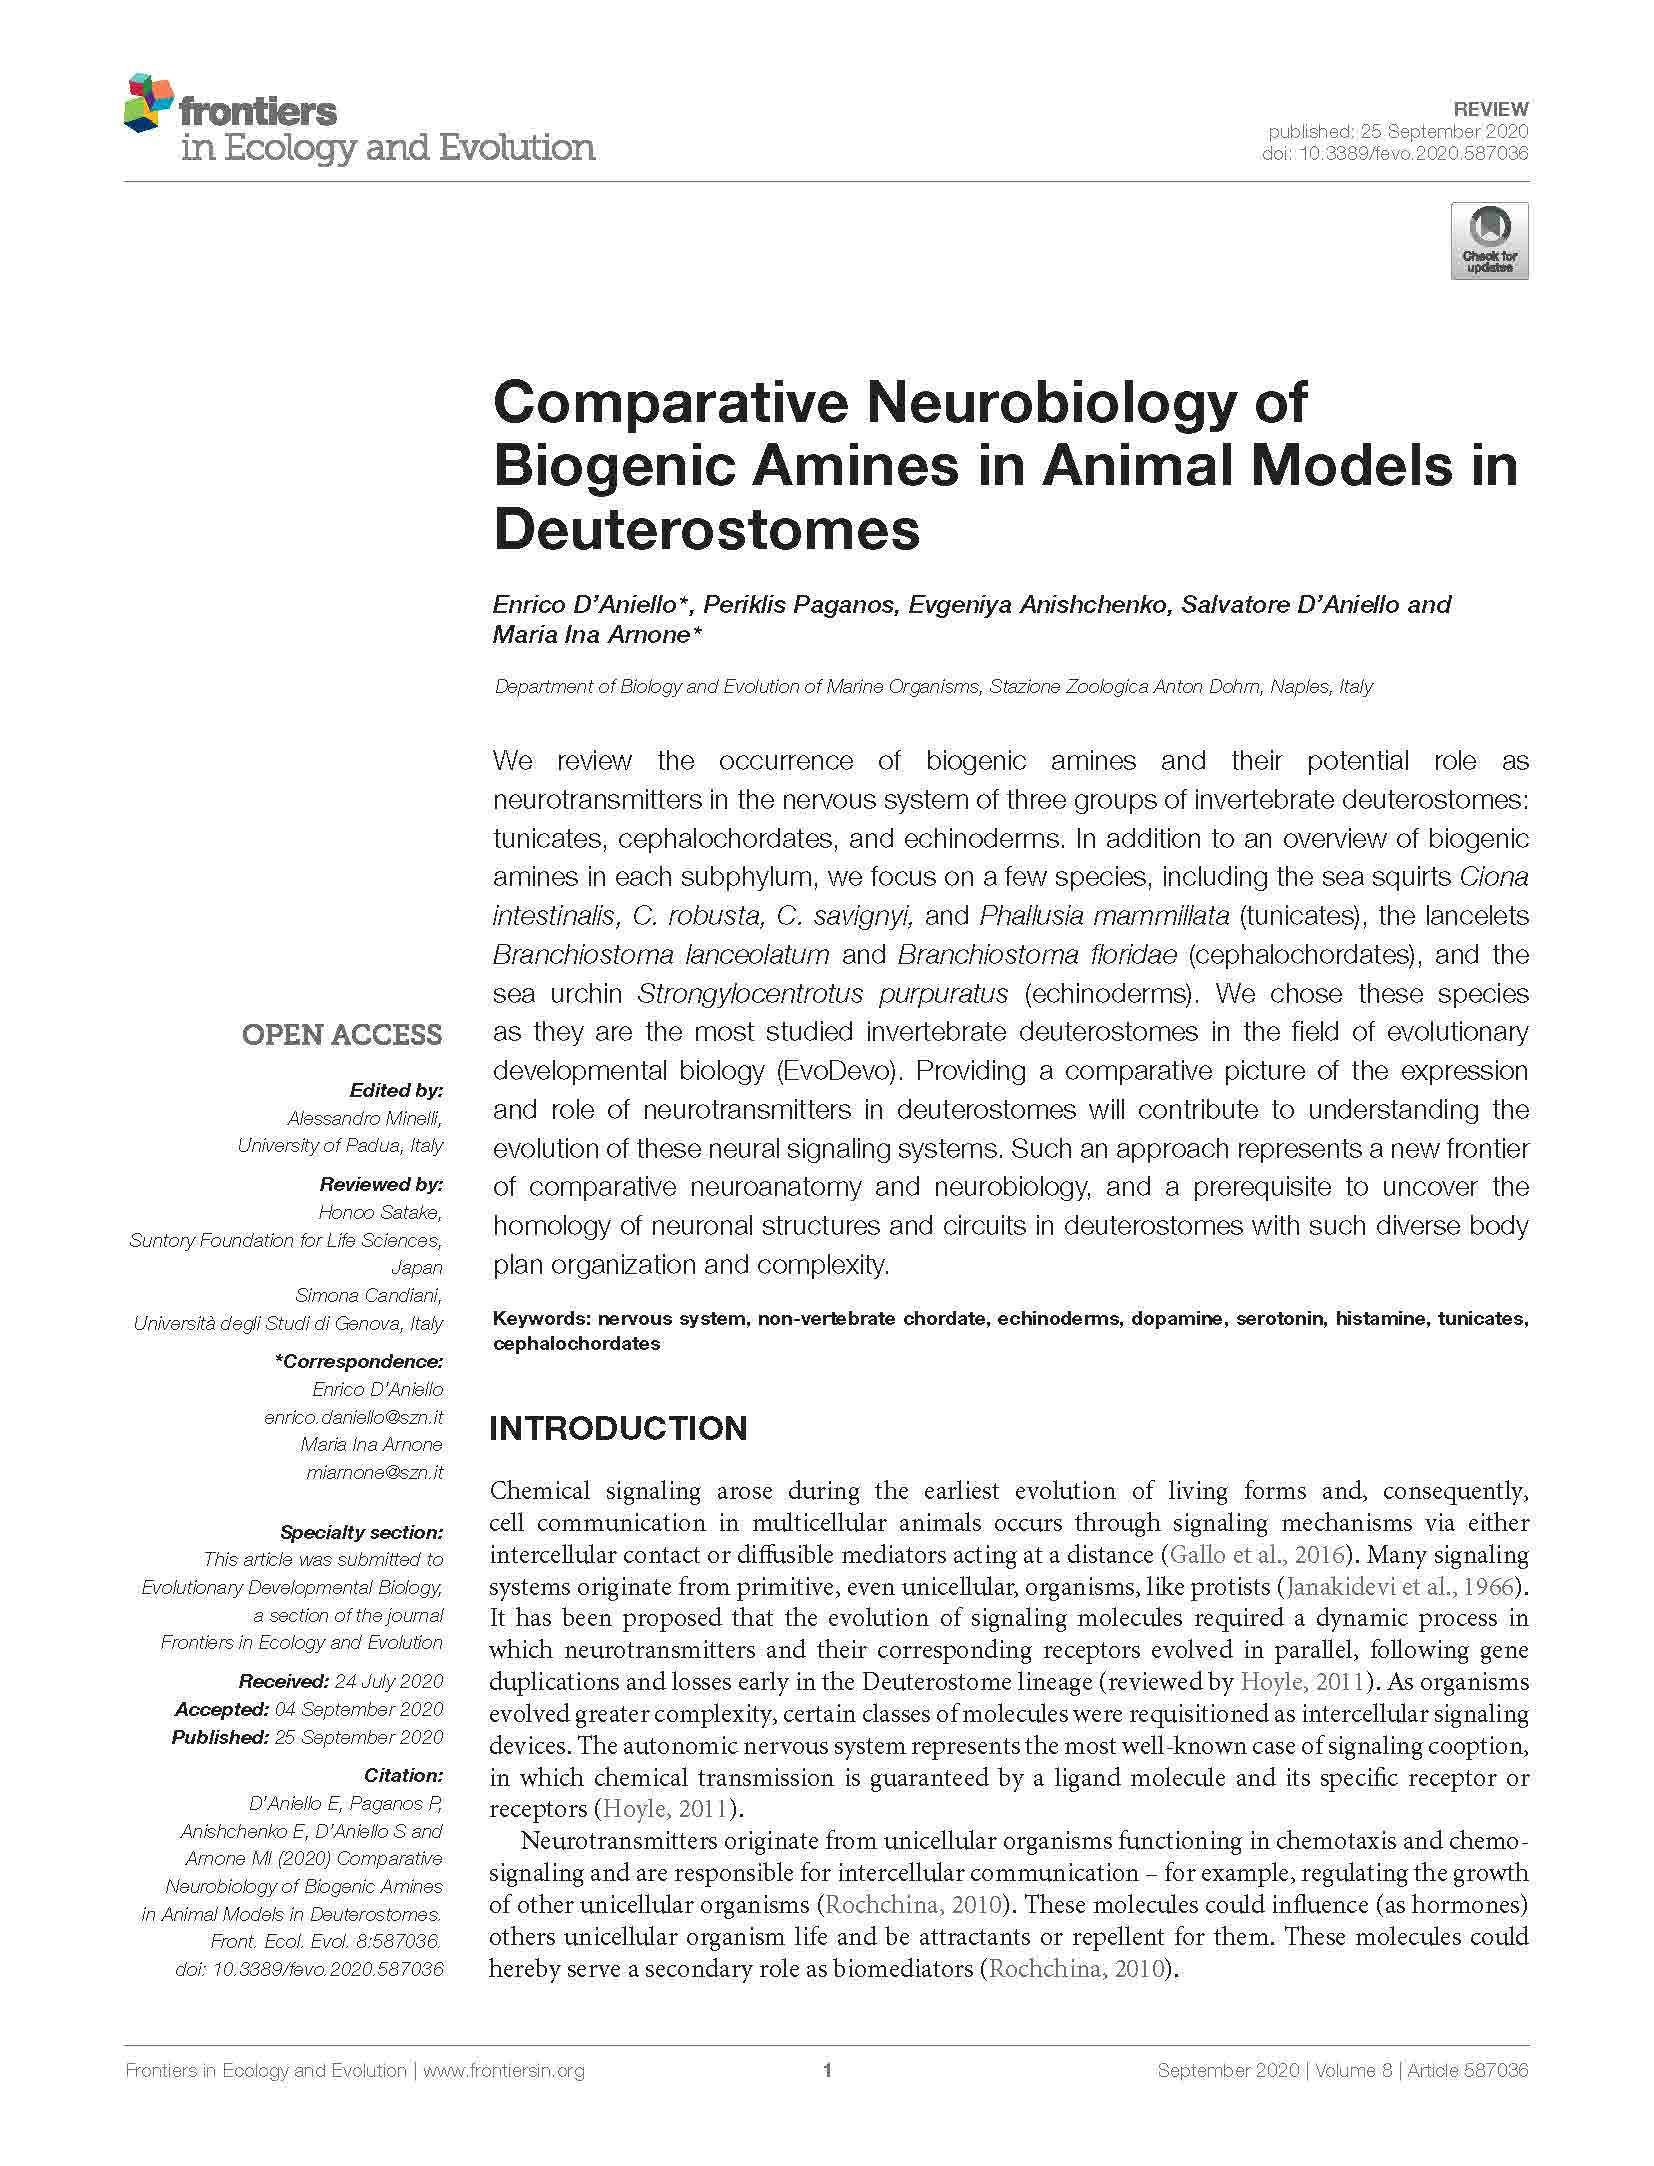 Comparative Neurobiology of Biogenic Amines in Animal Models in Deuterostomes